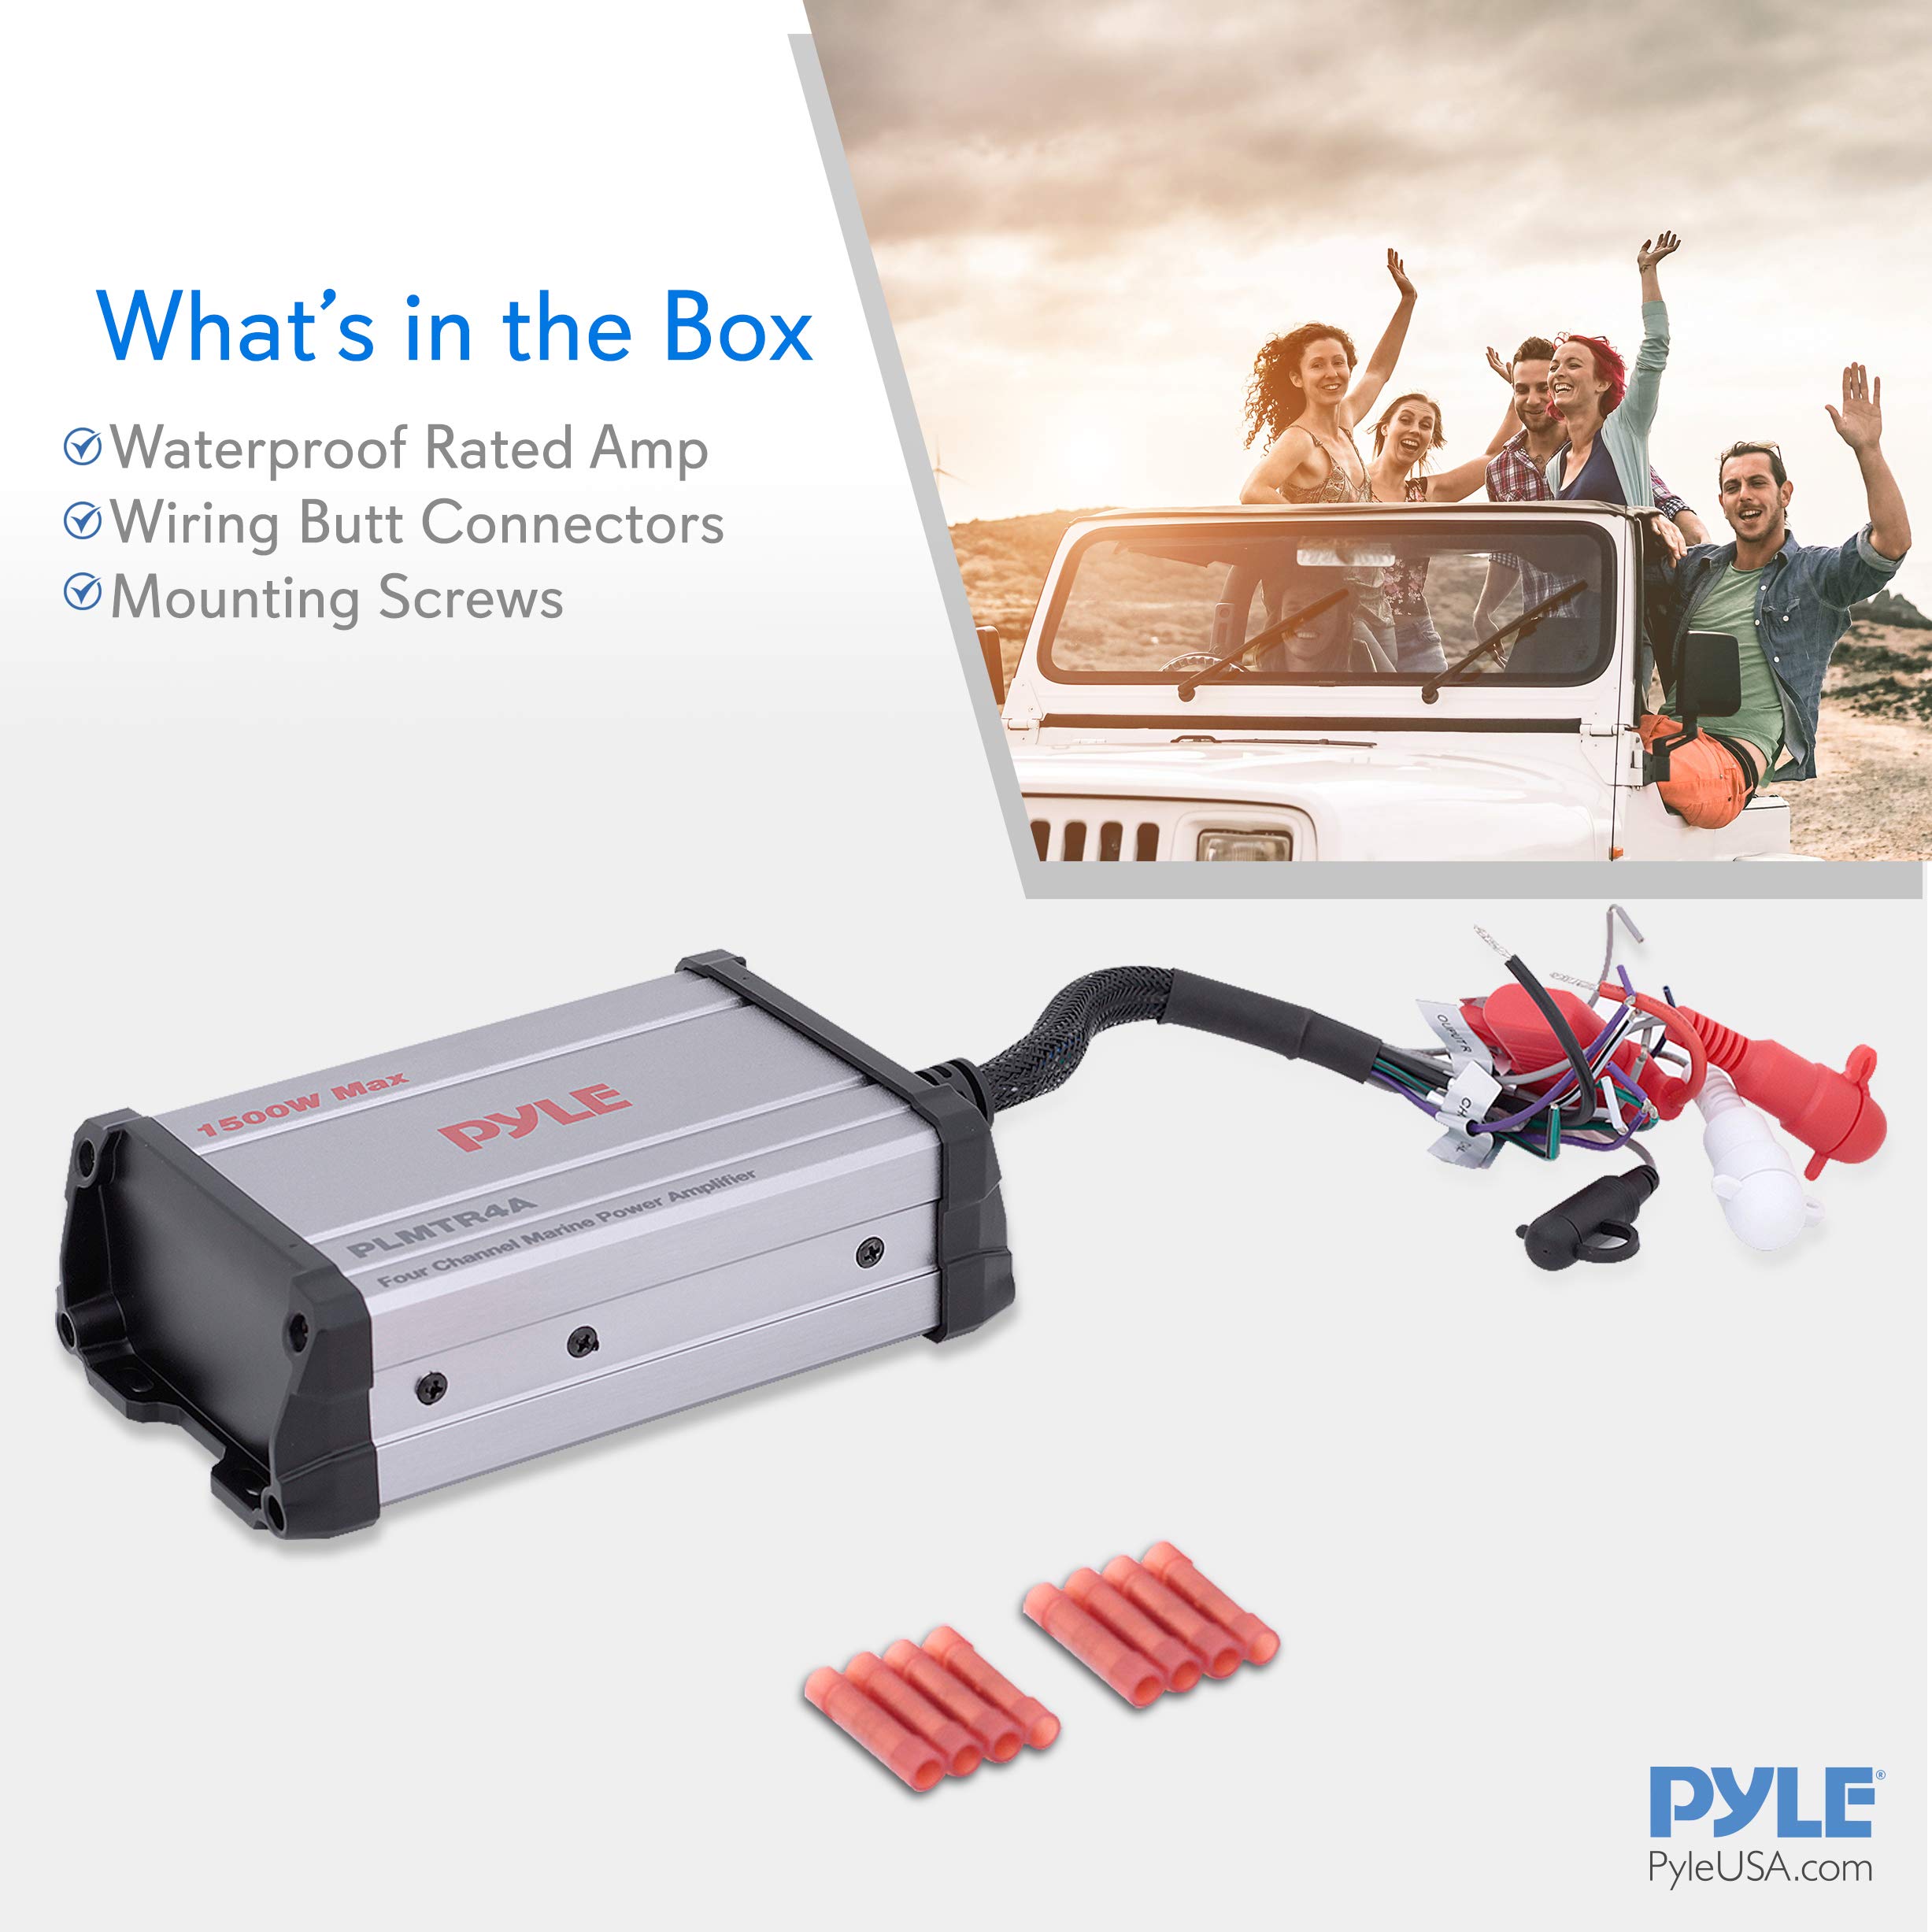 Pyle 4-Channel Marine Amplifier Receiver - Waterproof and Weatherproof Audio Subwoofer for Boat Stereo Speaker & Other Watercraft - 1200 Watt Power, Wired RCA, AUX and MP3 Audio Input Cable - PLMTR4A